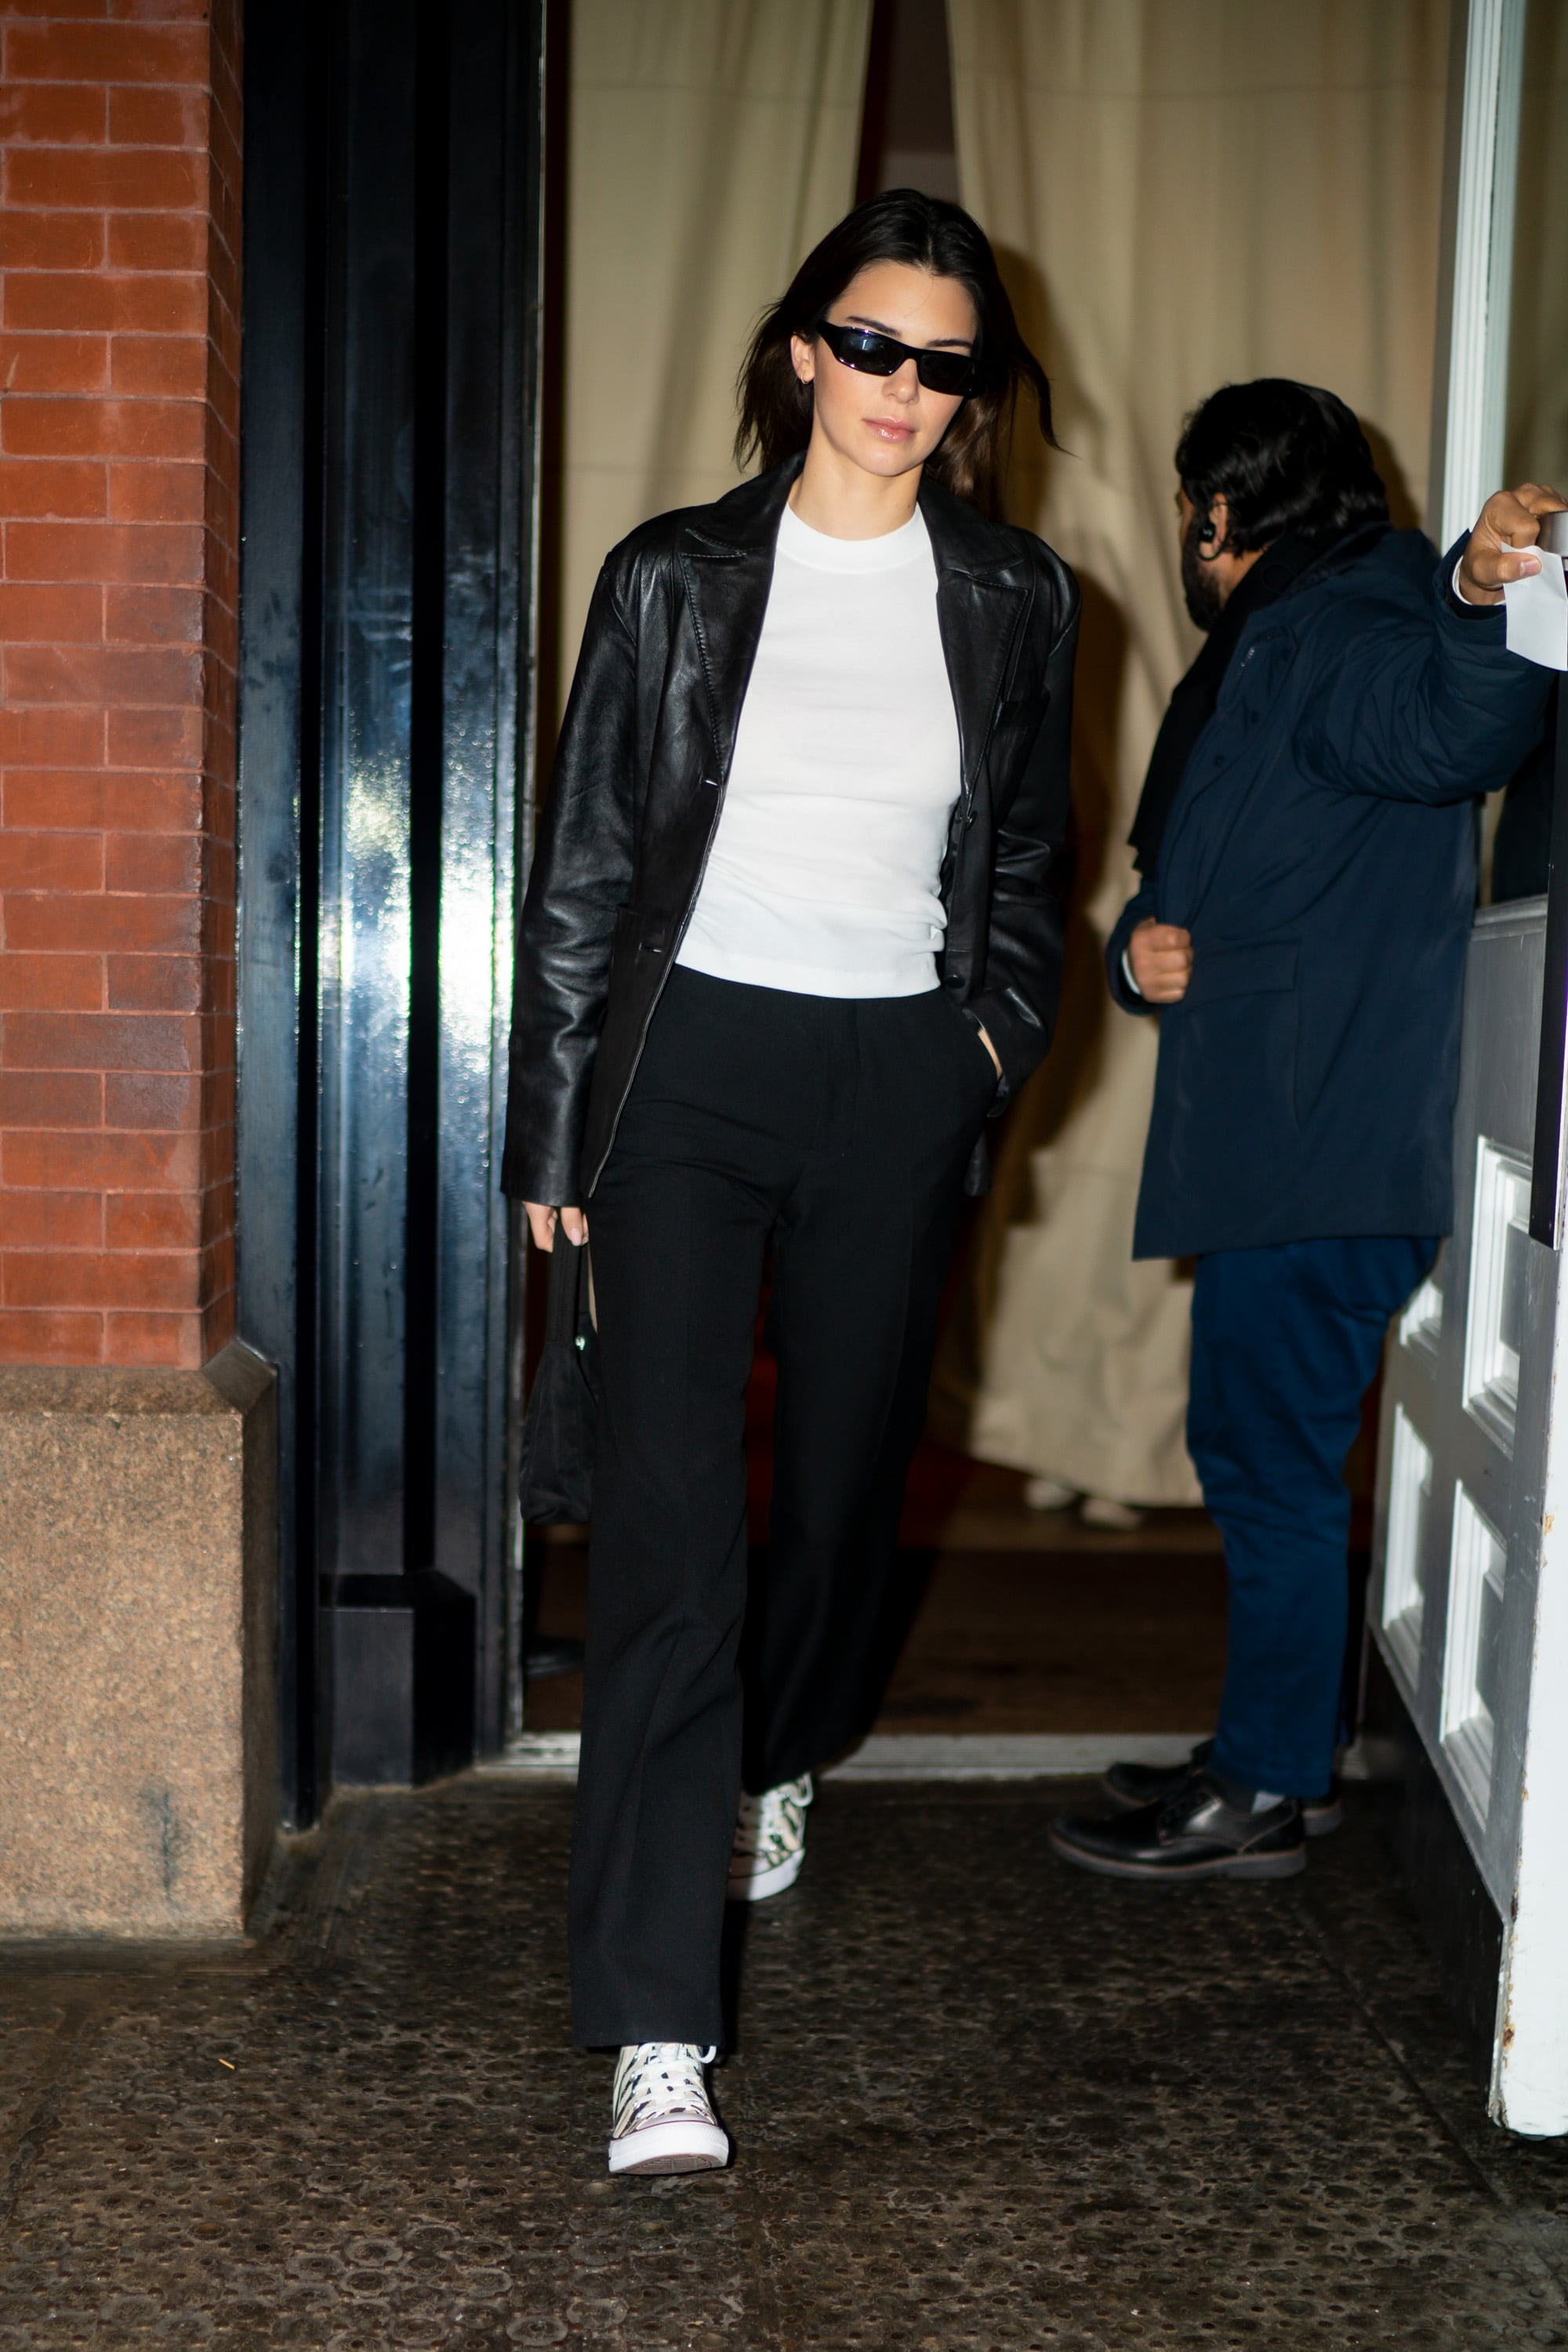 Kendall JennerOutfit Look in White Pants Street Style 2019 Oversized Solid  Beige Cotton Trousers Oversized White Graphic Tee Round White Adidas  Crisscross Tie   Kendall jenner outfits casual Kendall jenner street